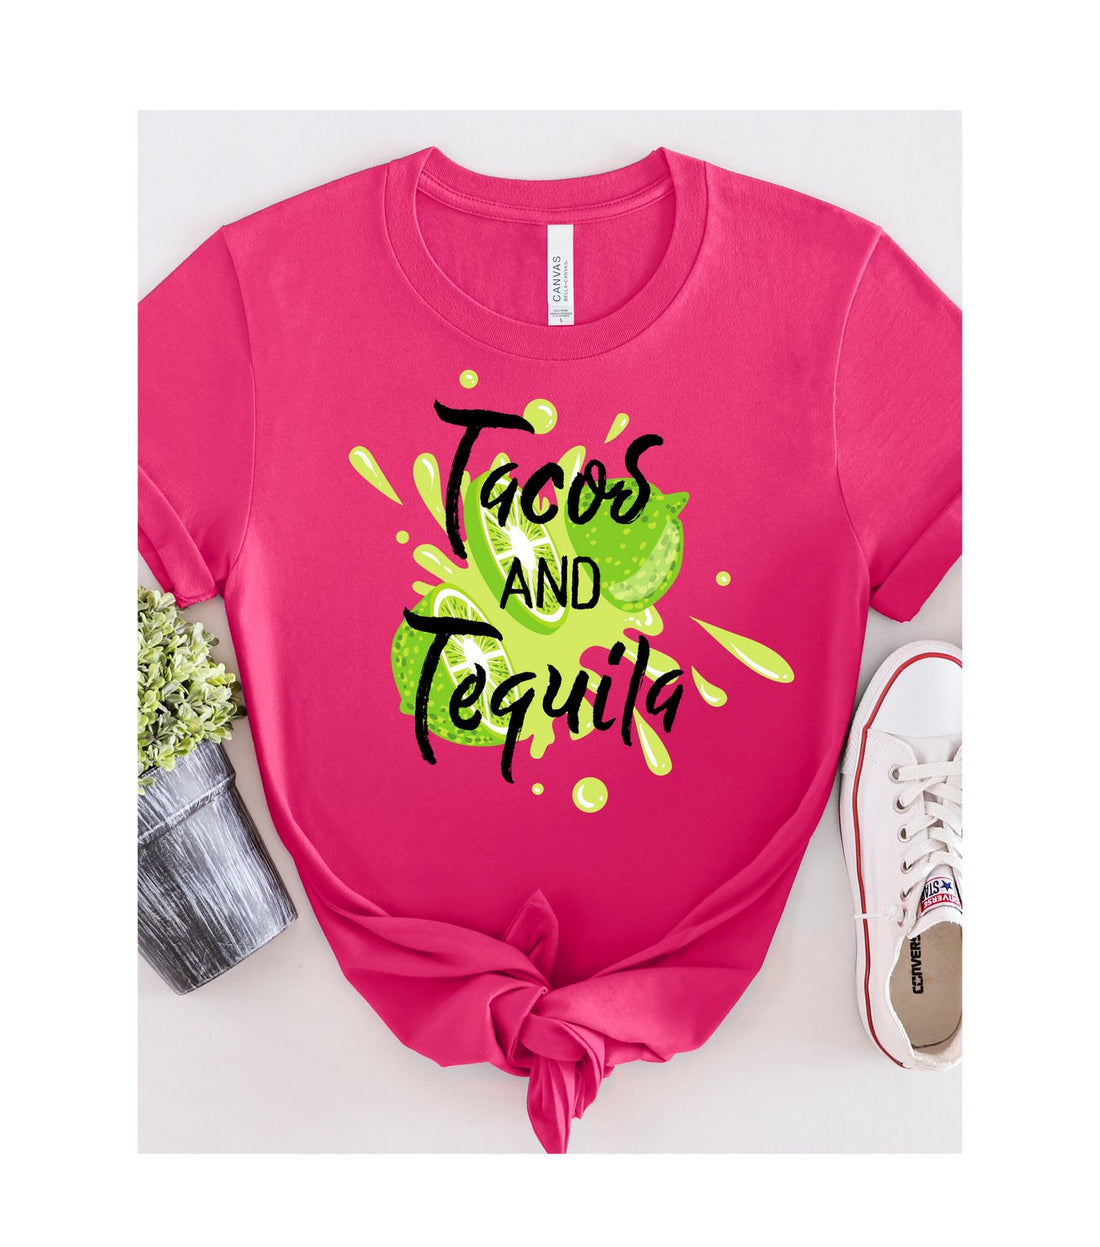 Boutique Tacos & Tequila - T-Shirt - Positively Sassy - Boutique Tacos & Tequila